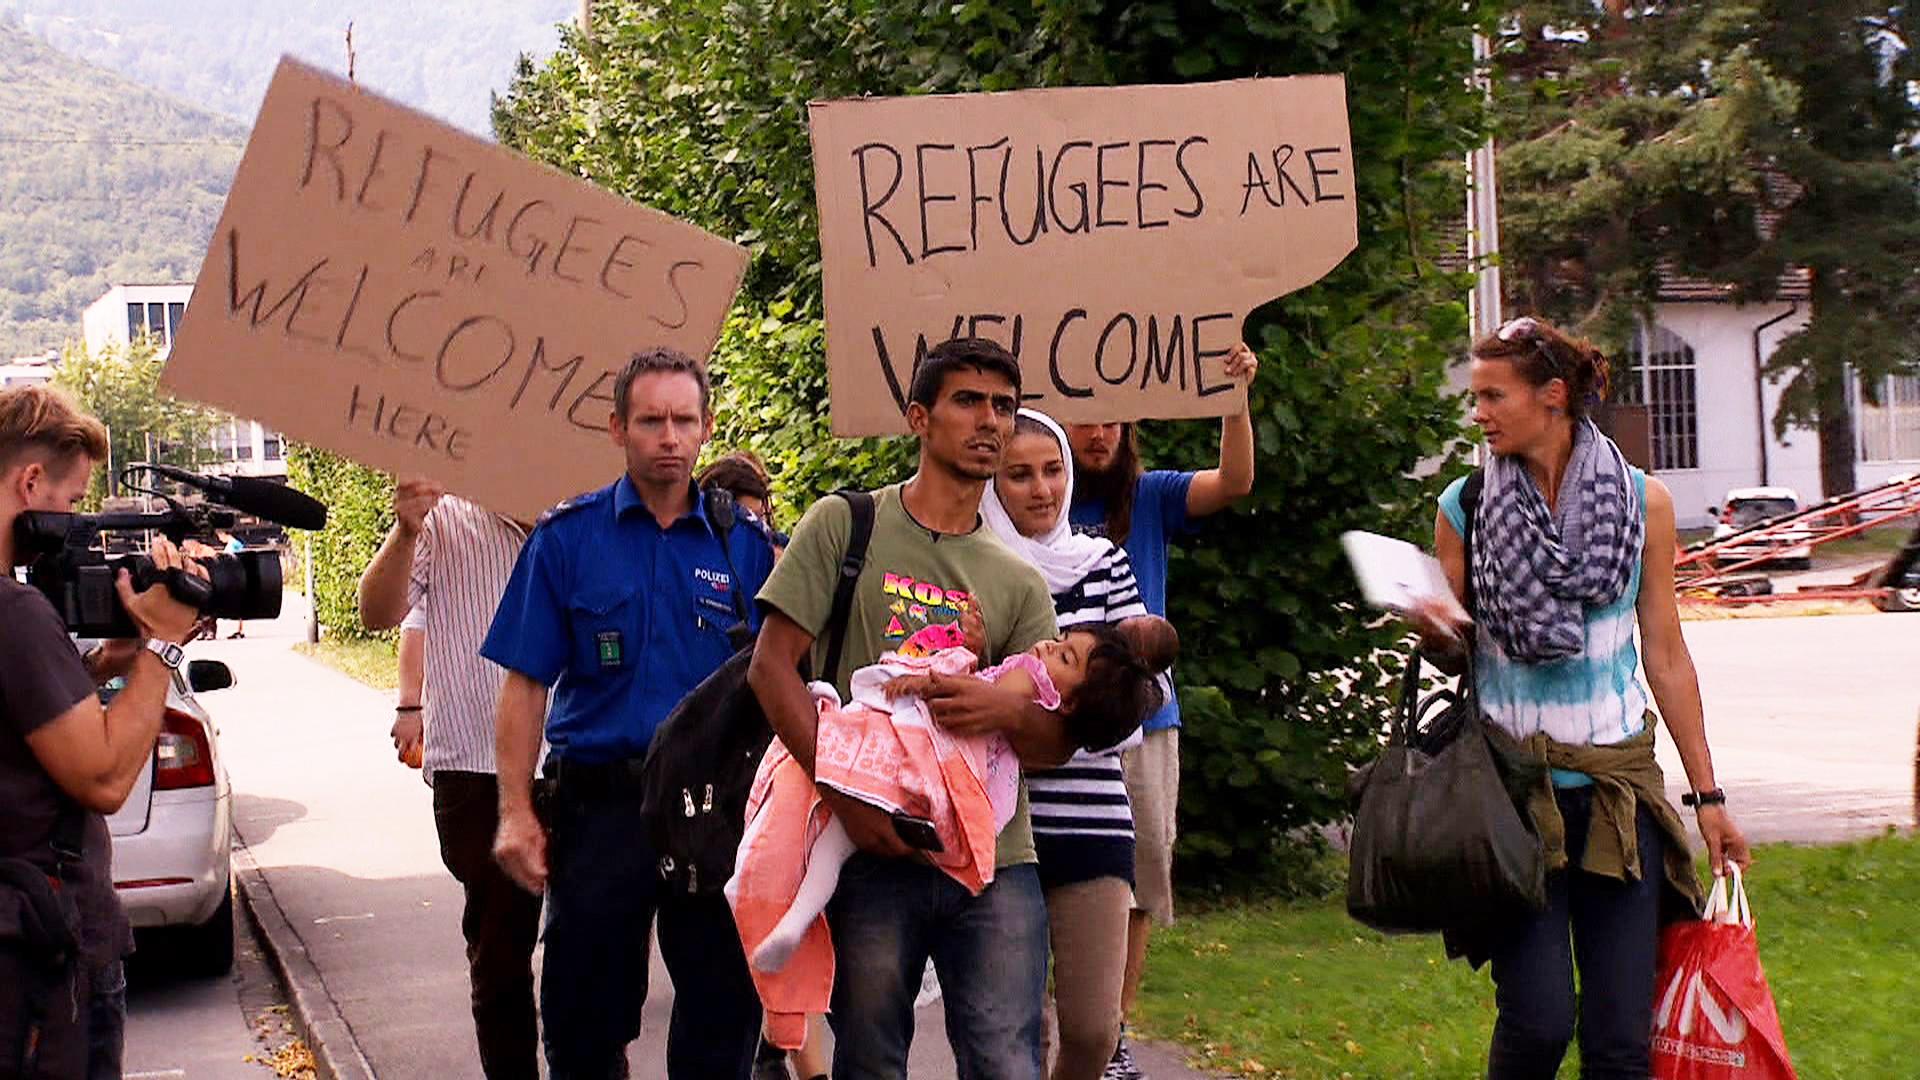 People welcome refugees at the border